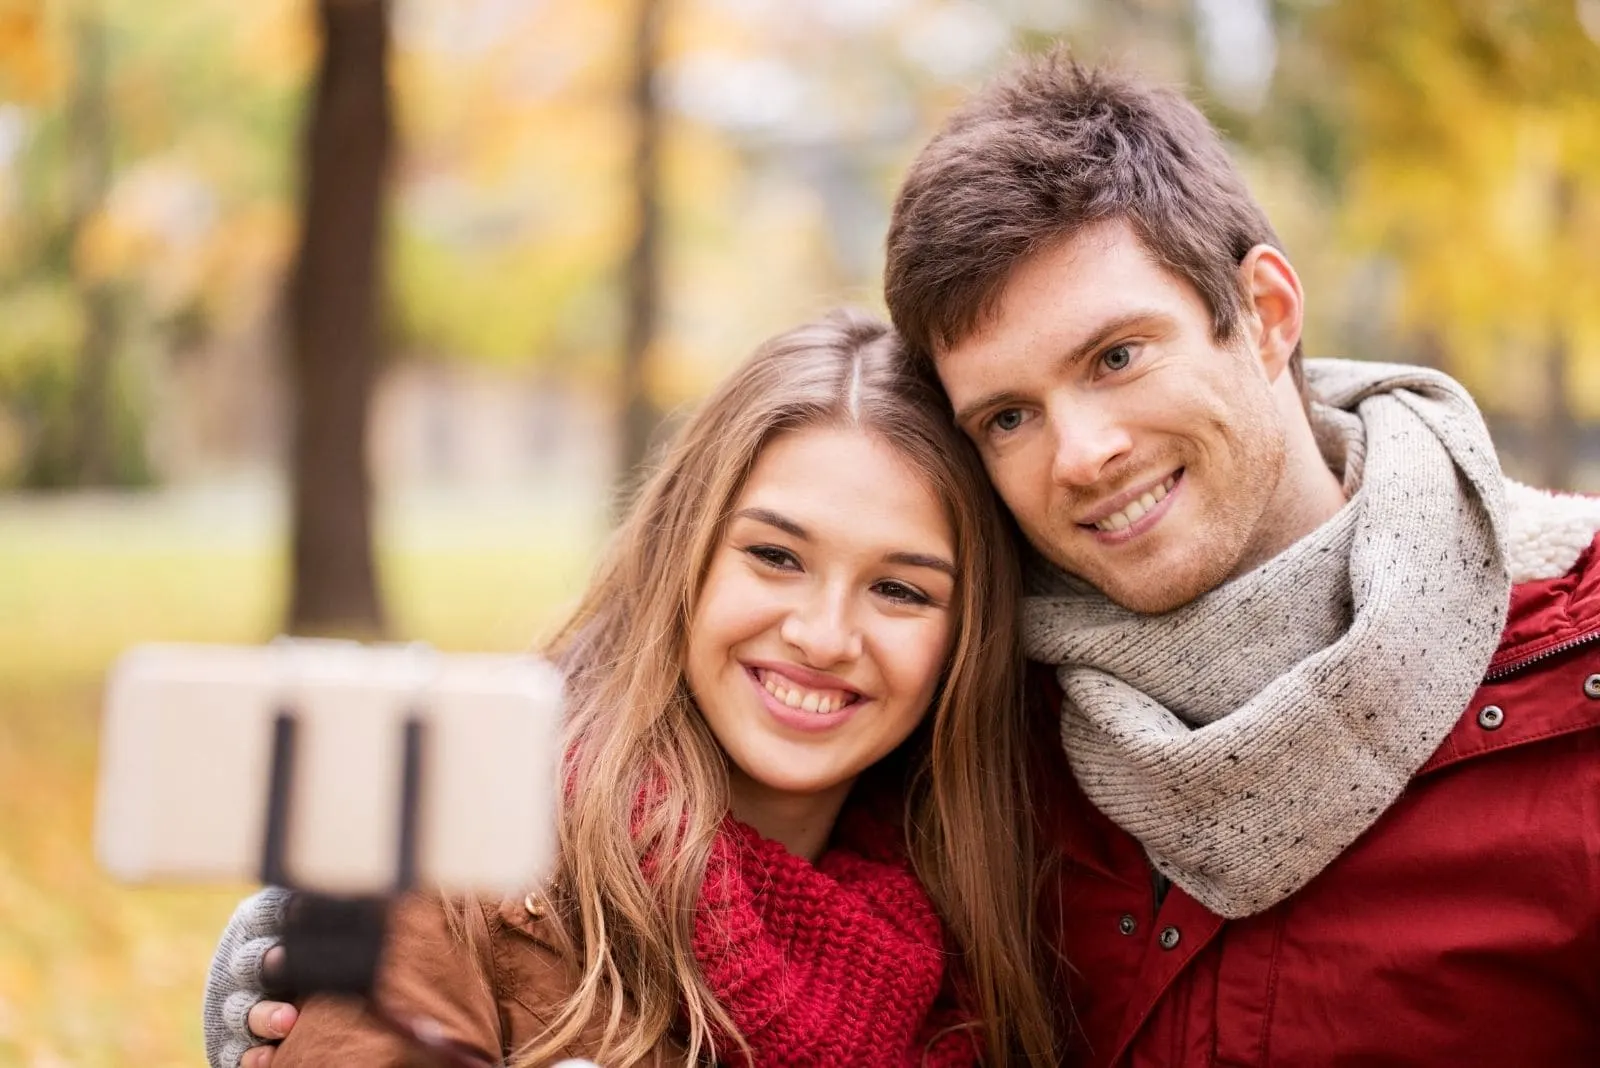 happy smiling couple taking a picture with smartphone and selfie stick during autumn season